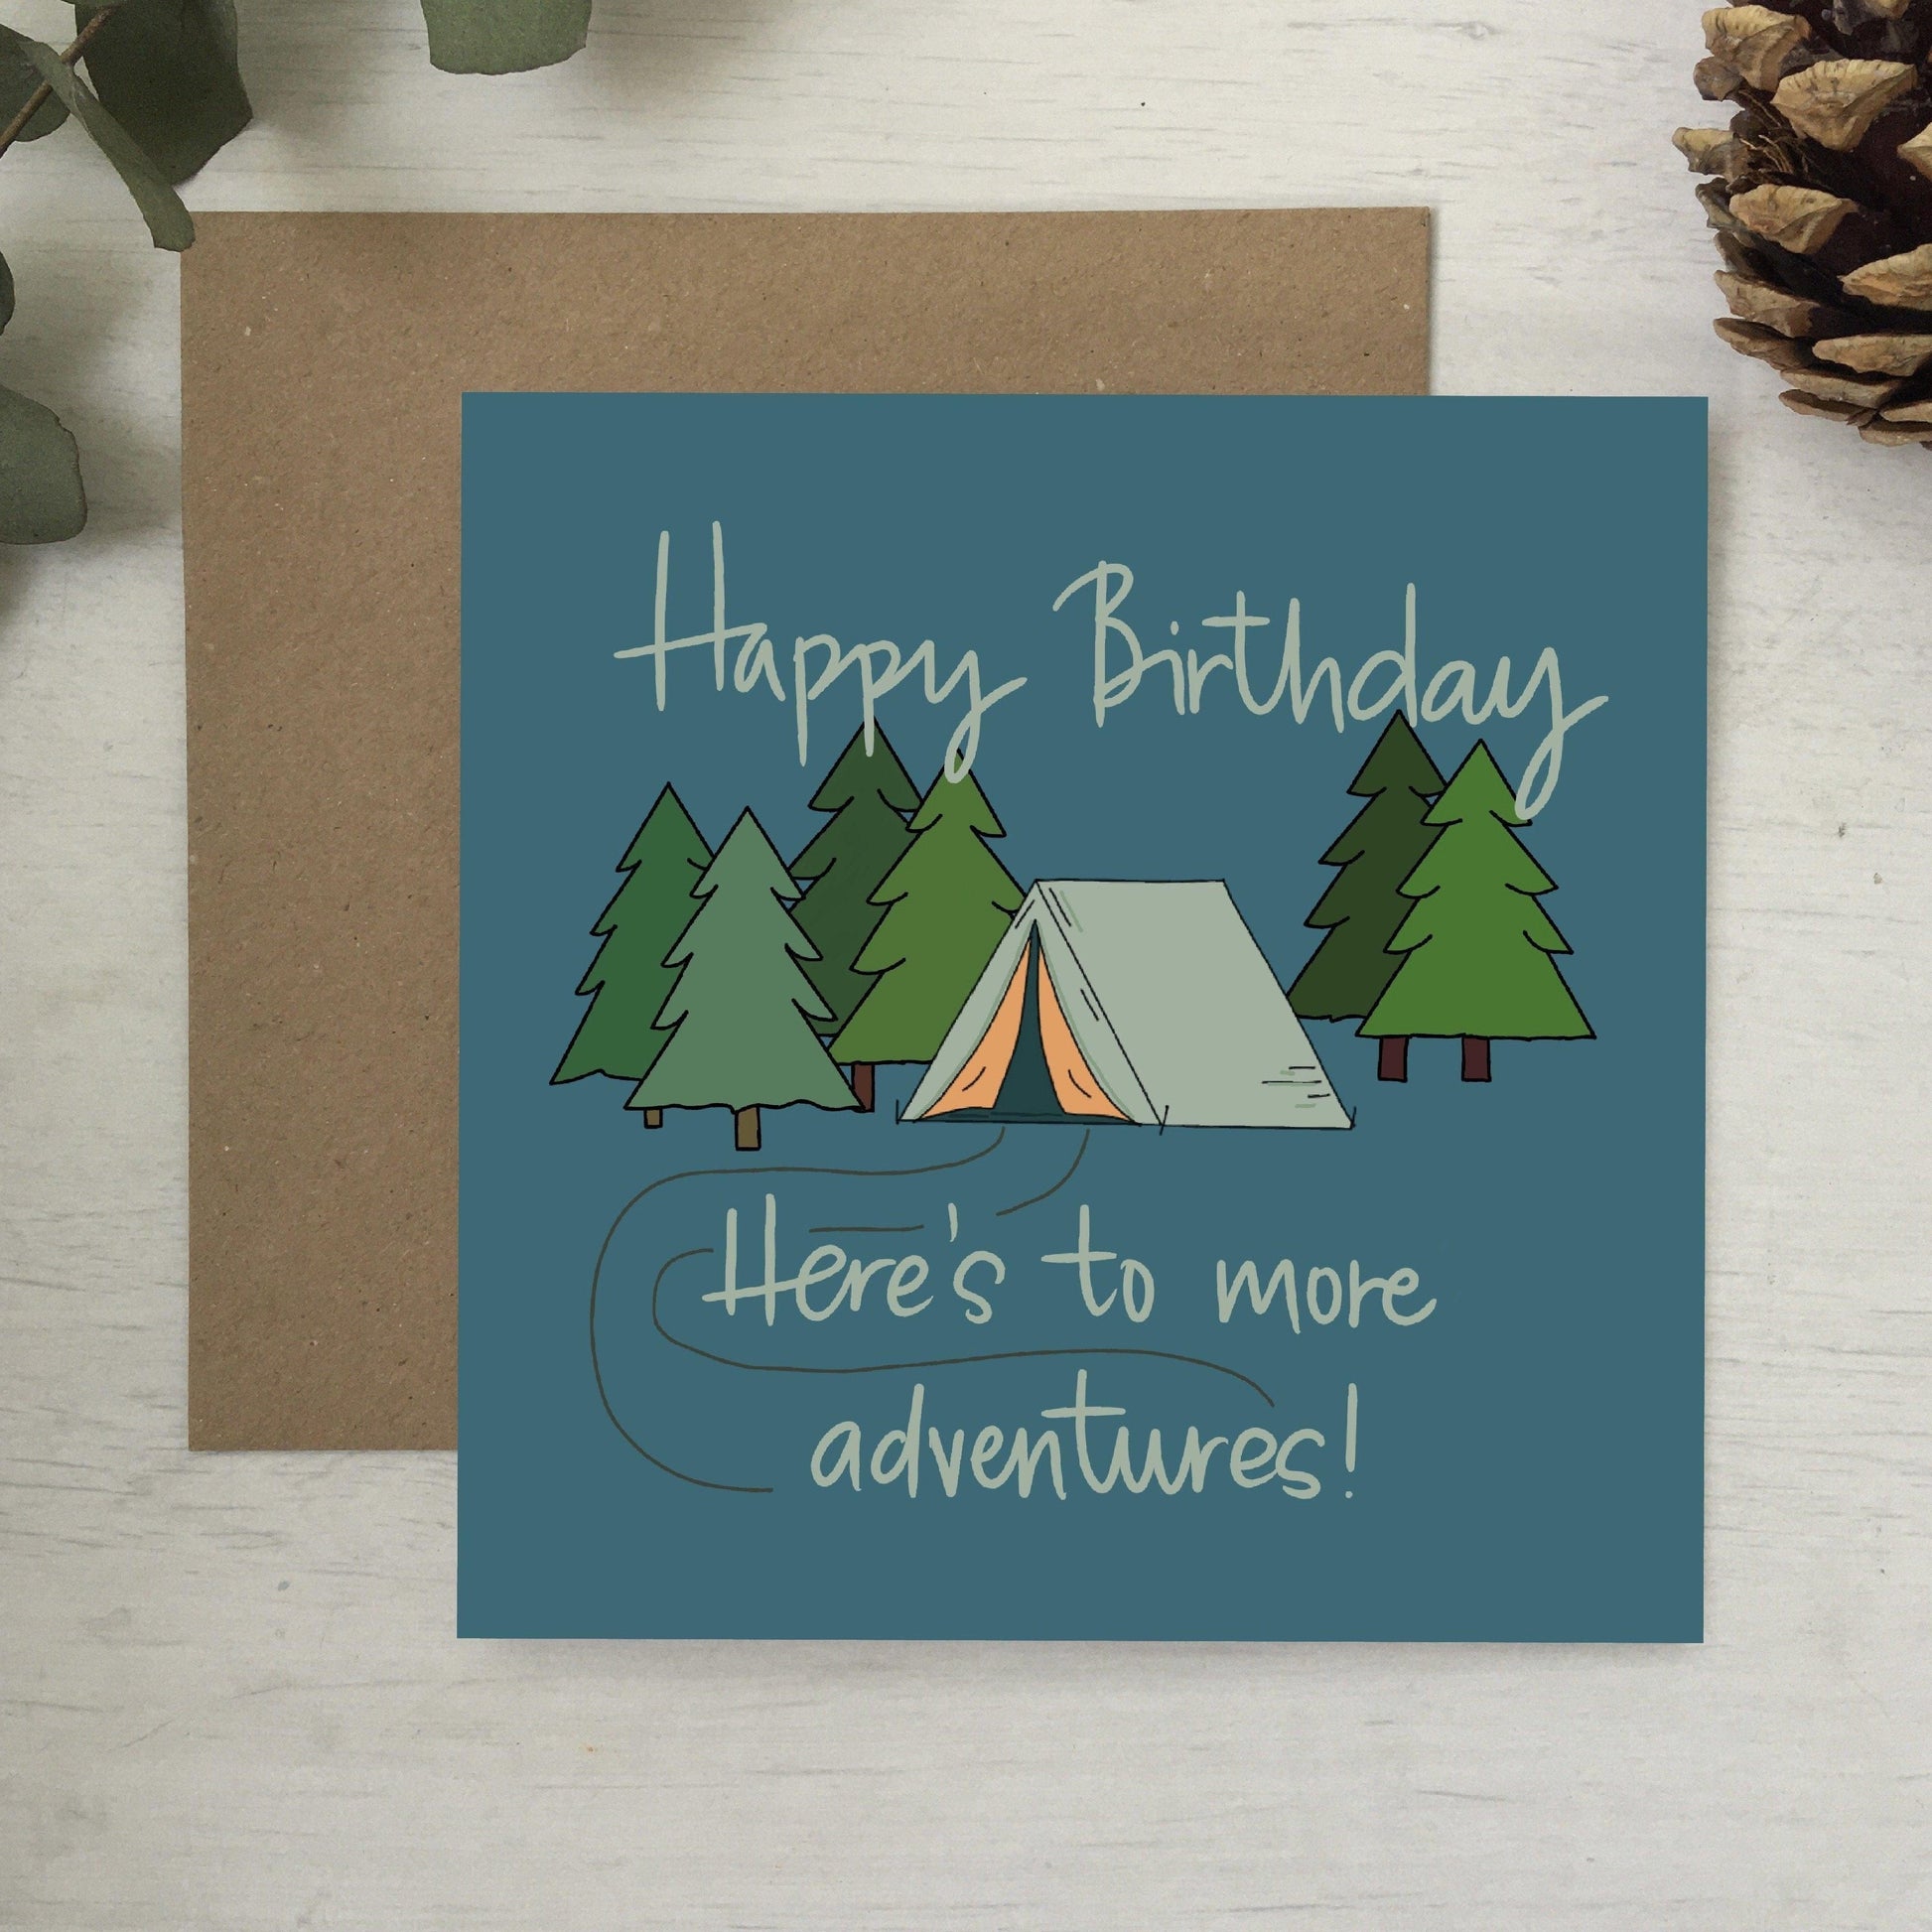 unique birthday card for him - here's to more adventures with a tent and trees